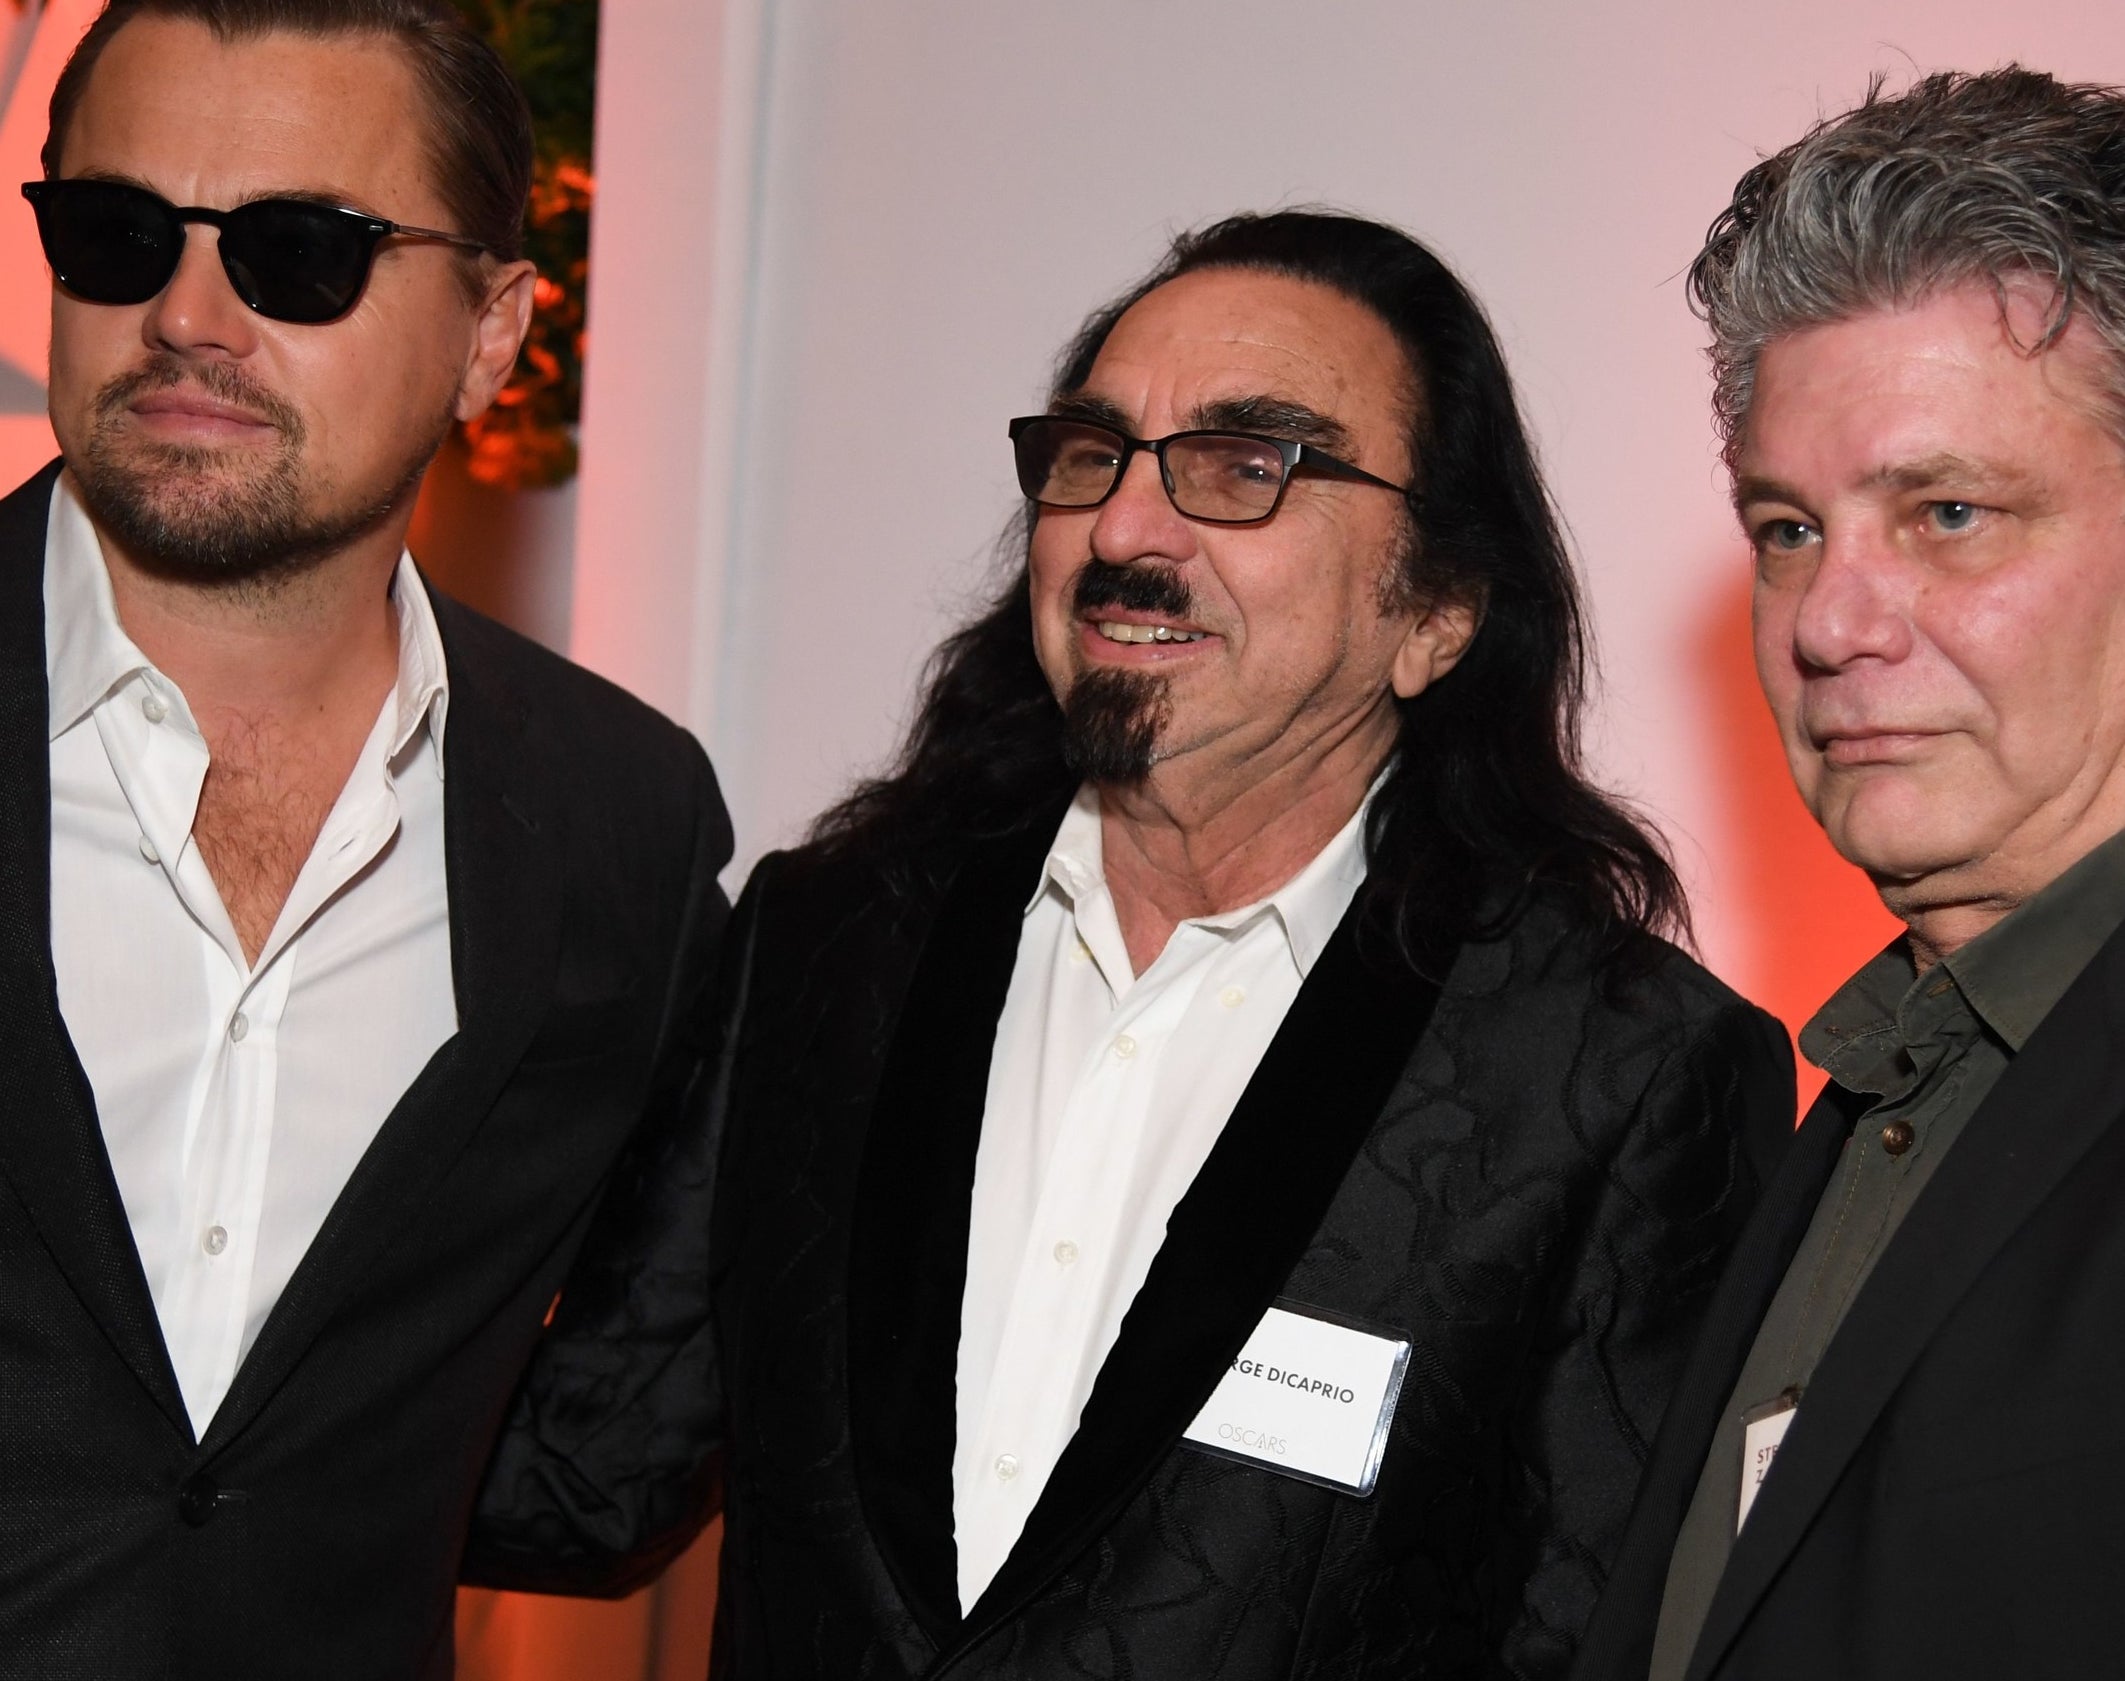 Leo and George stand together at an event